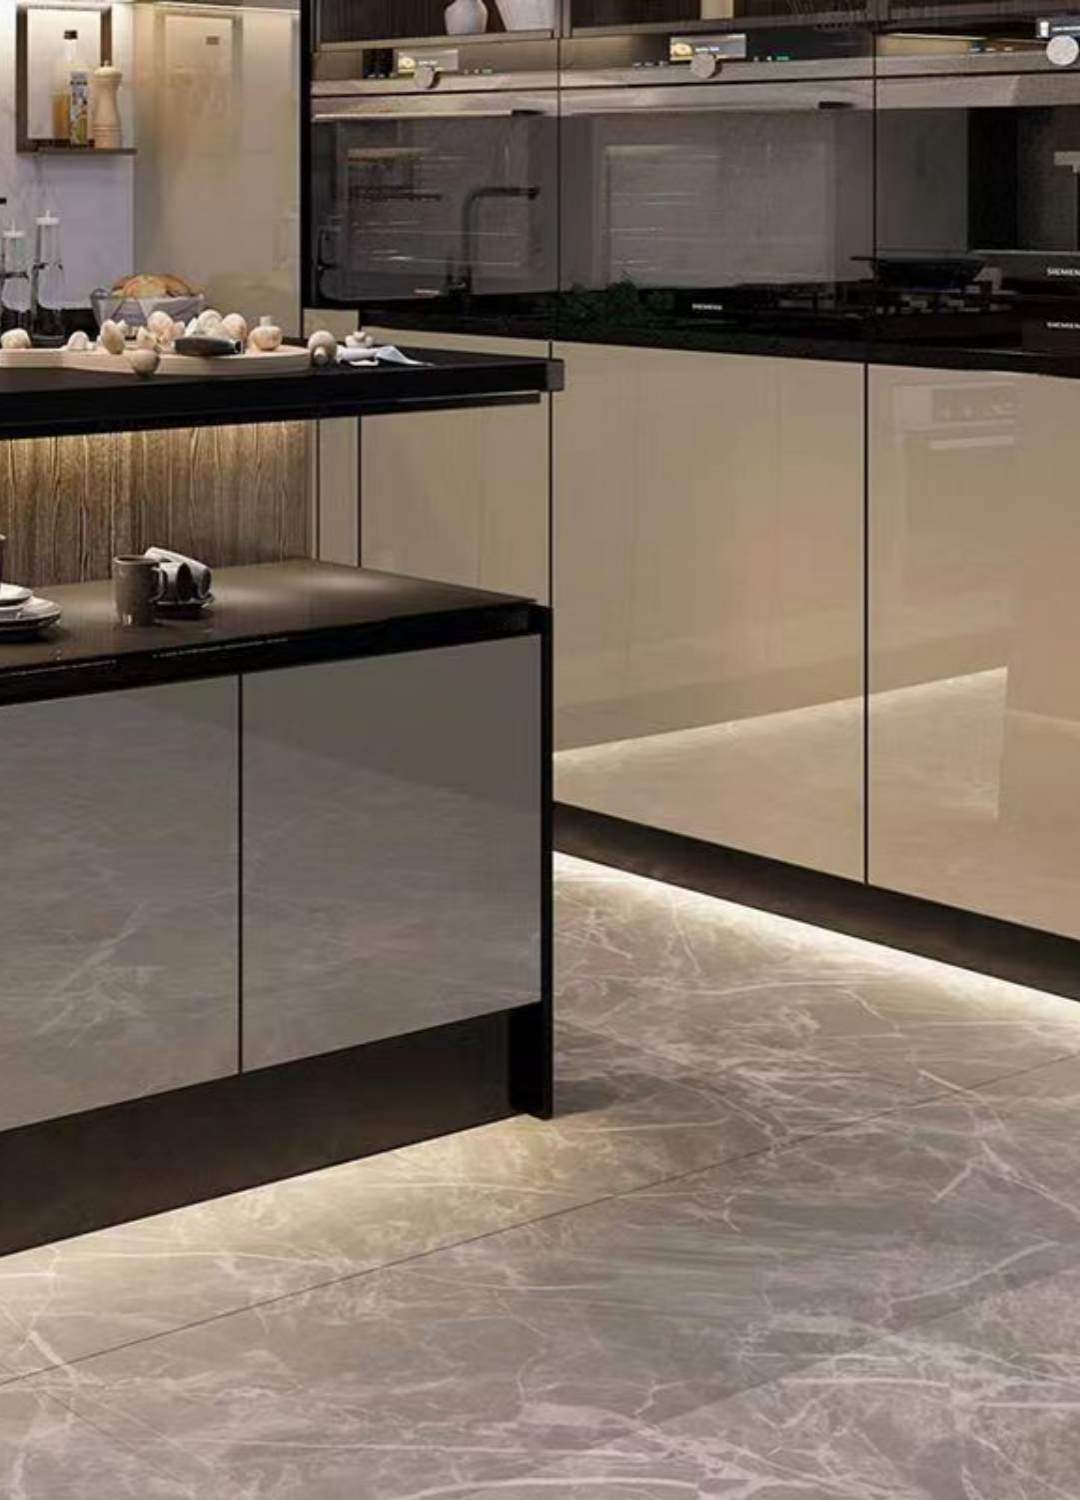 Sleek Kitchen - A light strip decoration installed under cabinets in a modern kitchen, providing practical task lighting and a stylish accent.